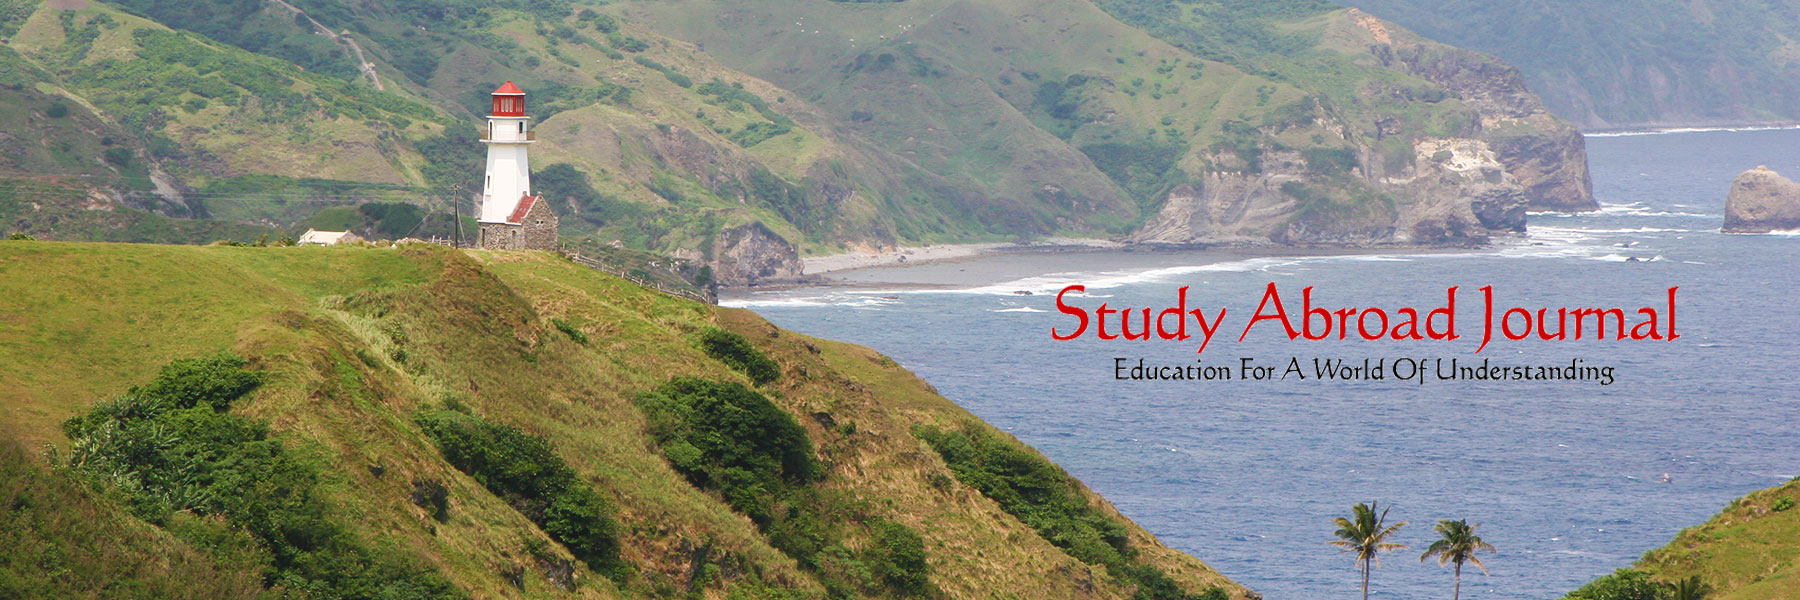 Featured Story | The Batanes Islands and the Ivantan Culture - The Philippines - Steven Andrew Martin Ph.D.